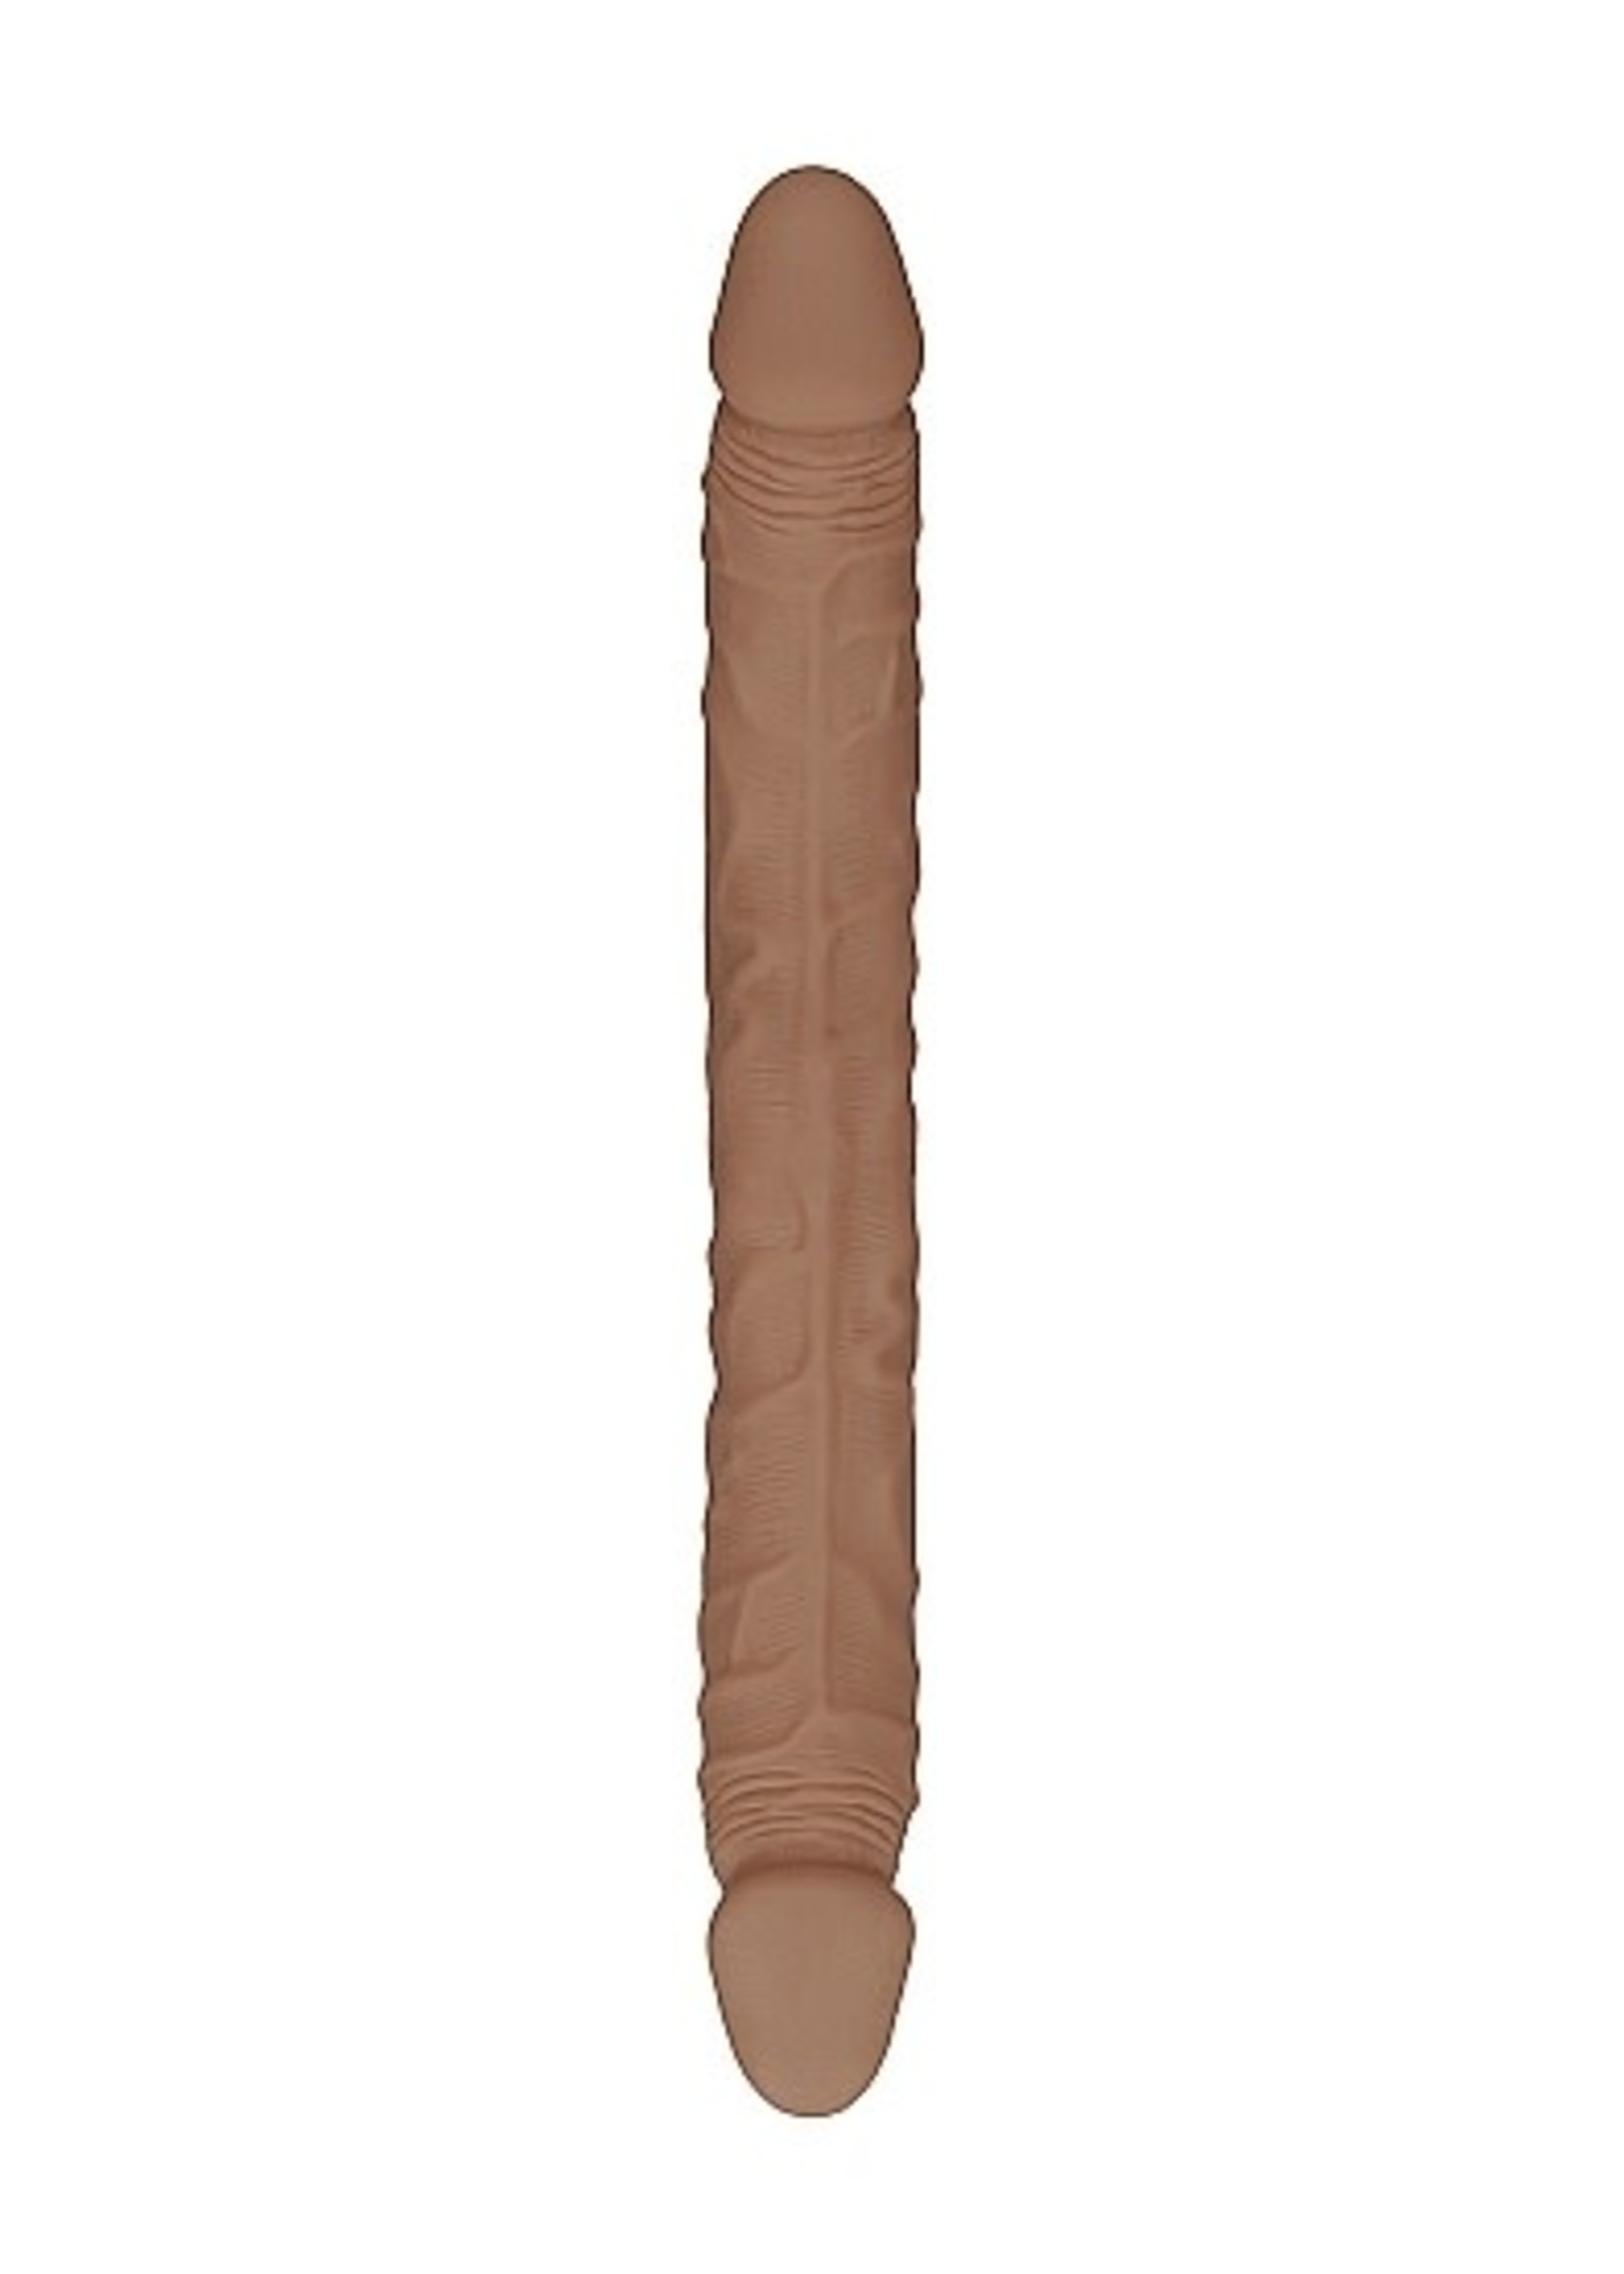 Realrock by Shots Double dong 18 inch - tan